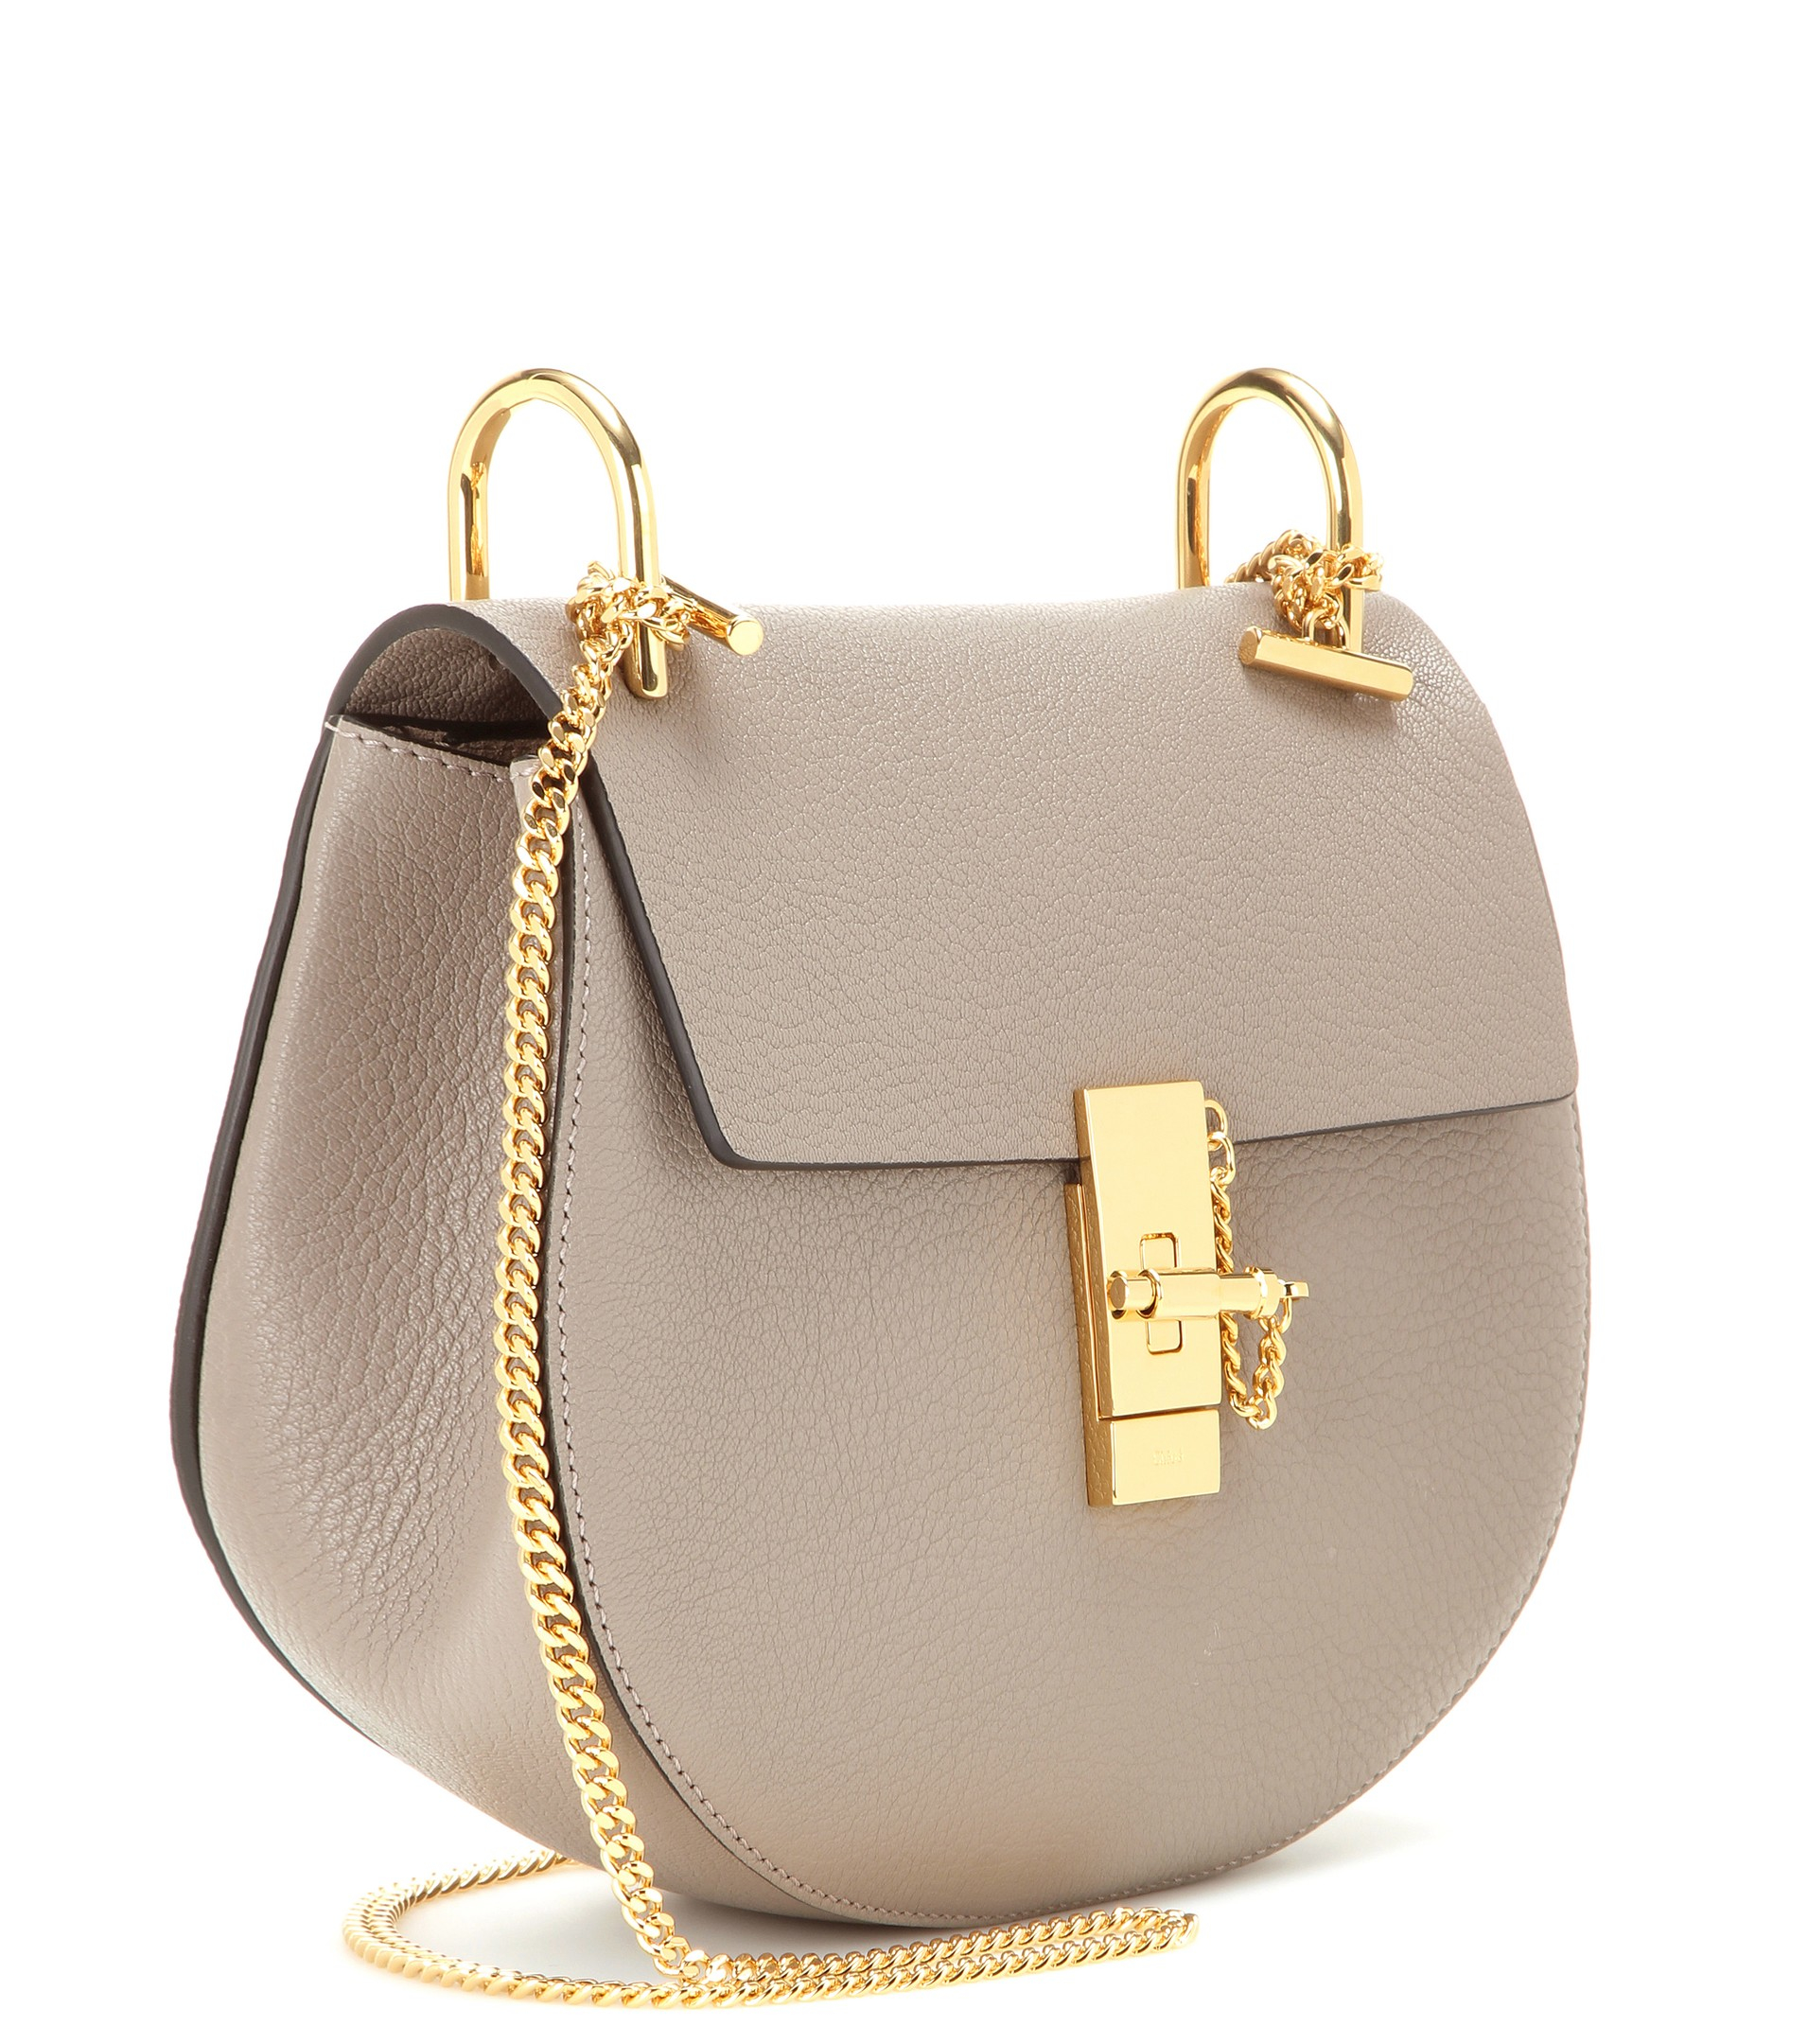 Chloé Drew Small Leather Shoulder Bag in Gray - Lyst